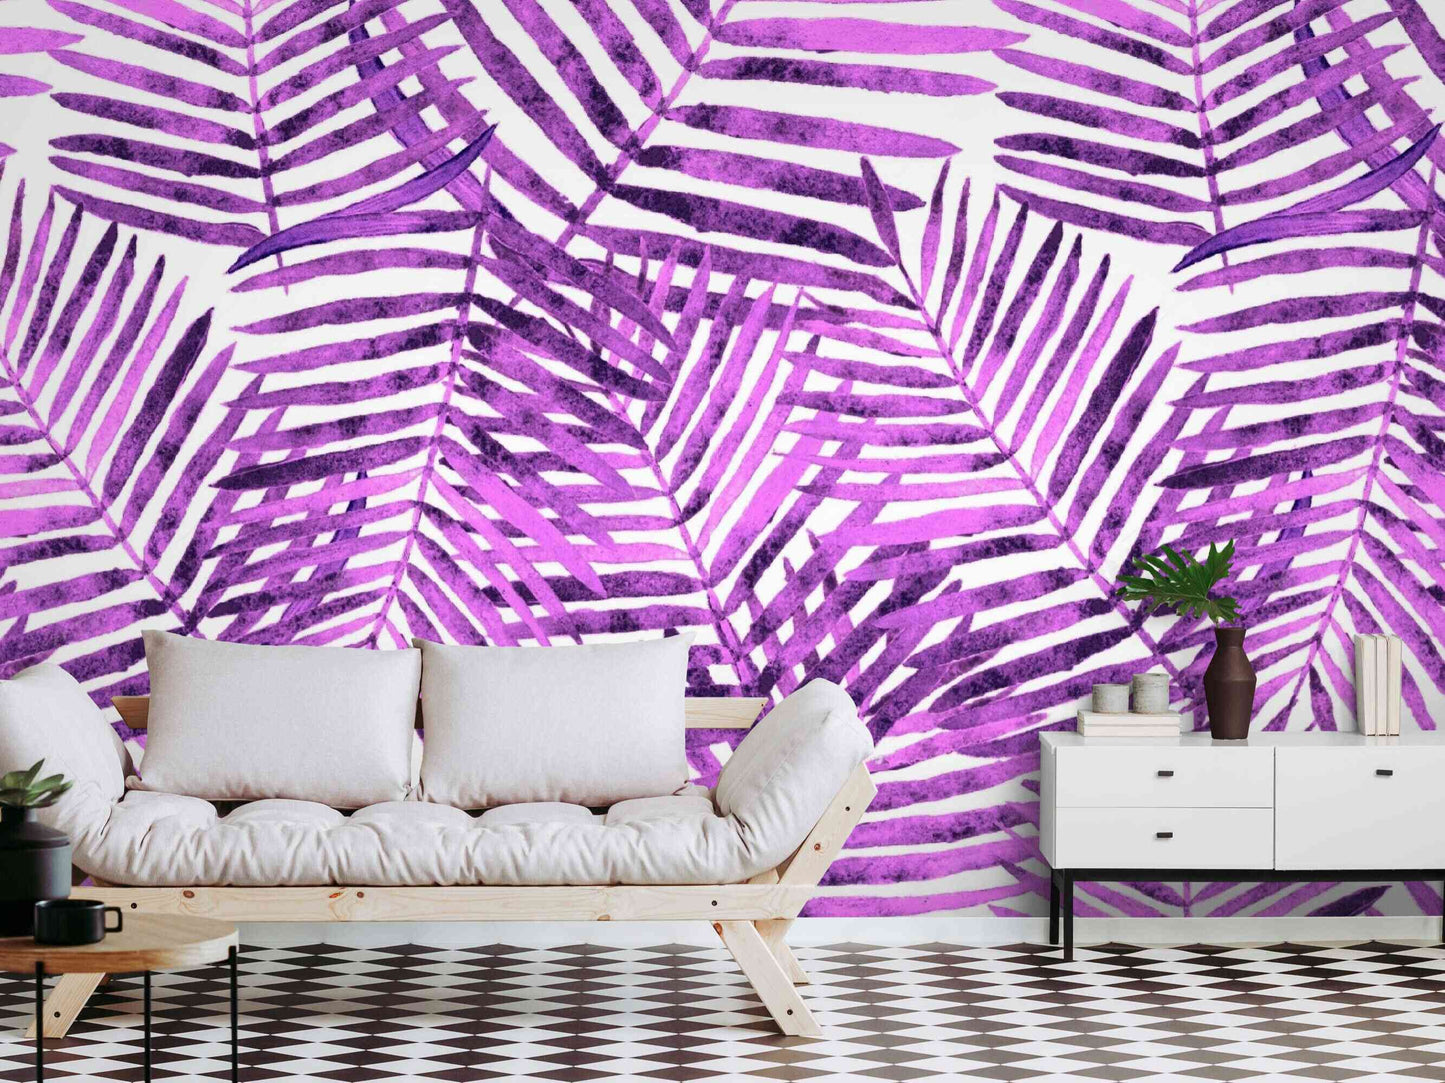 Chic and elegant purple leaves wallpaper in a contemporary room setting